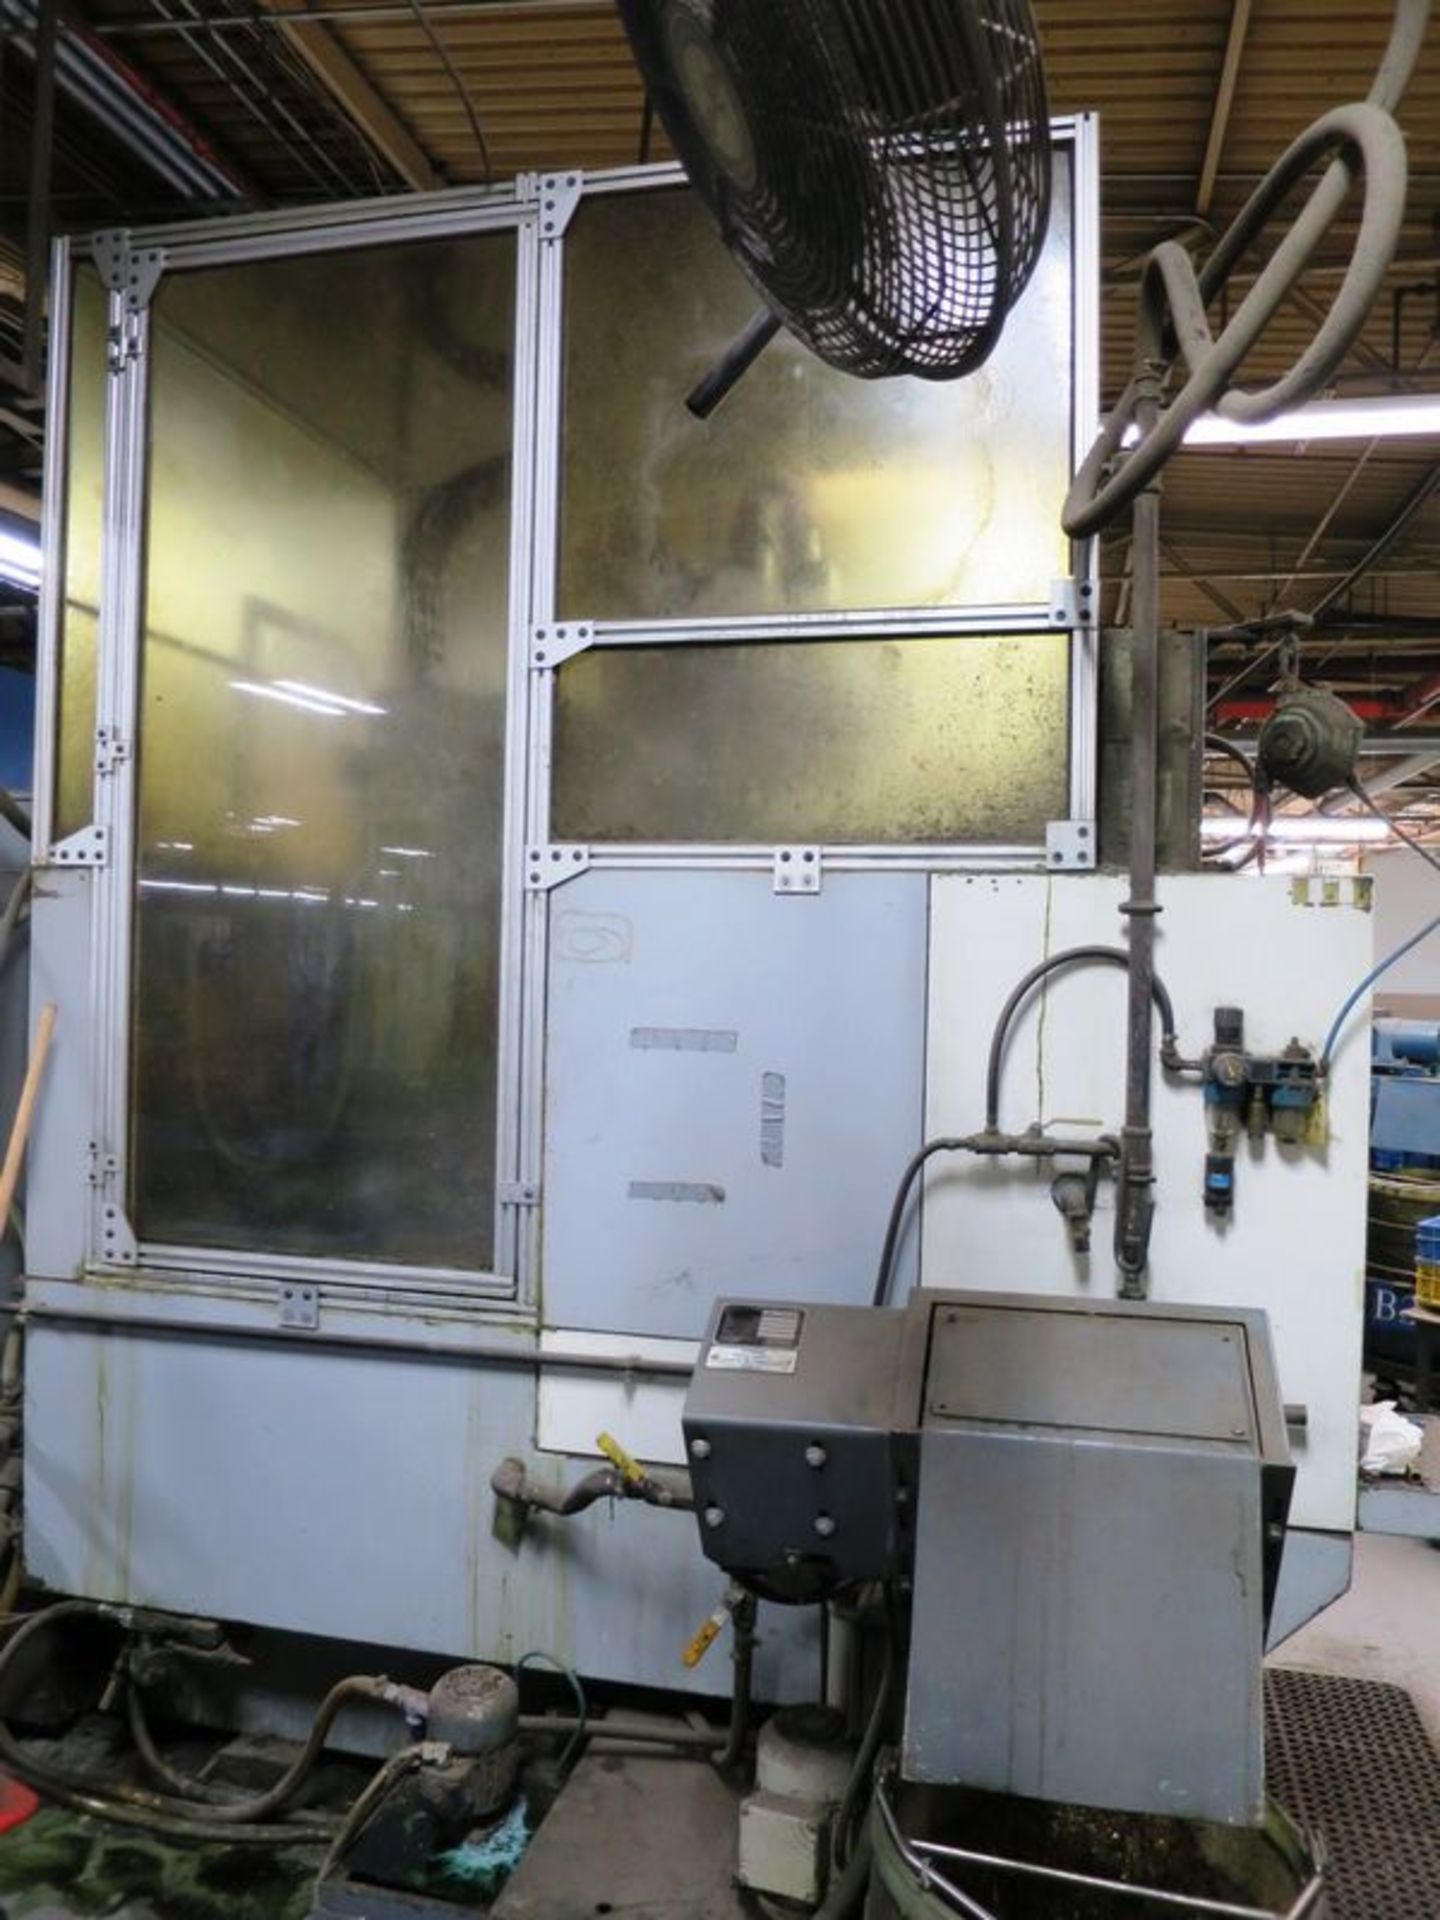 Chiron FZ-12W Magnum CNC Vertical Machining Center, S/N 487-46, New 1995 General Specifications, - Image 8 of 15